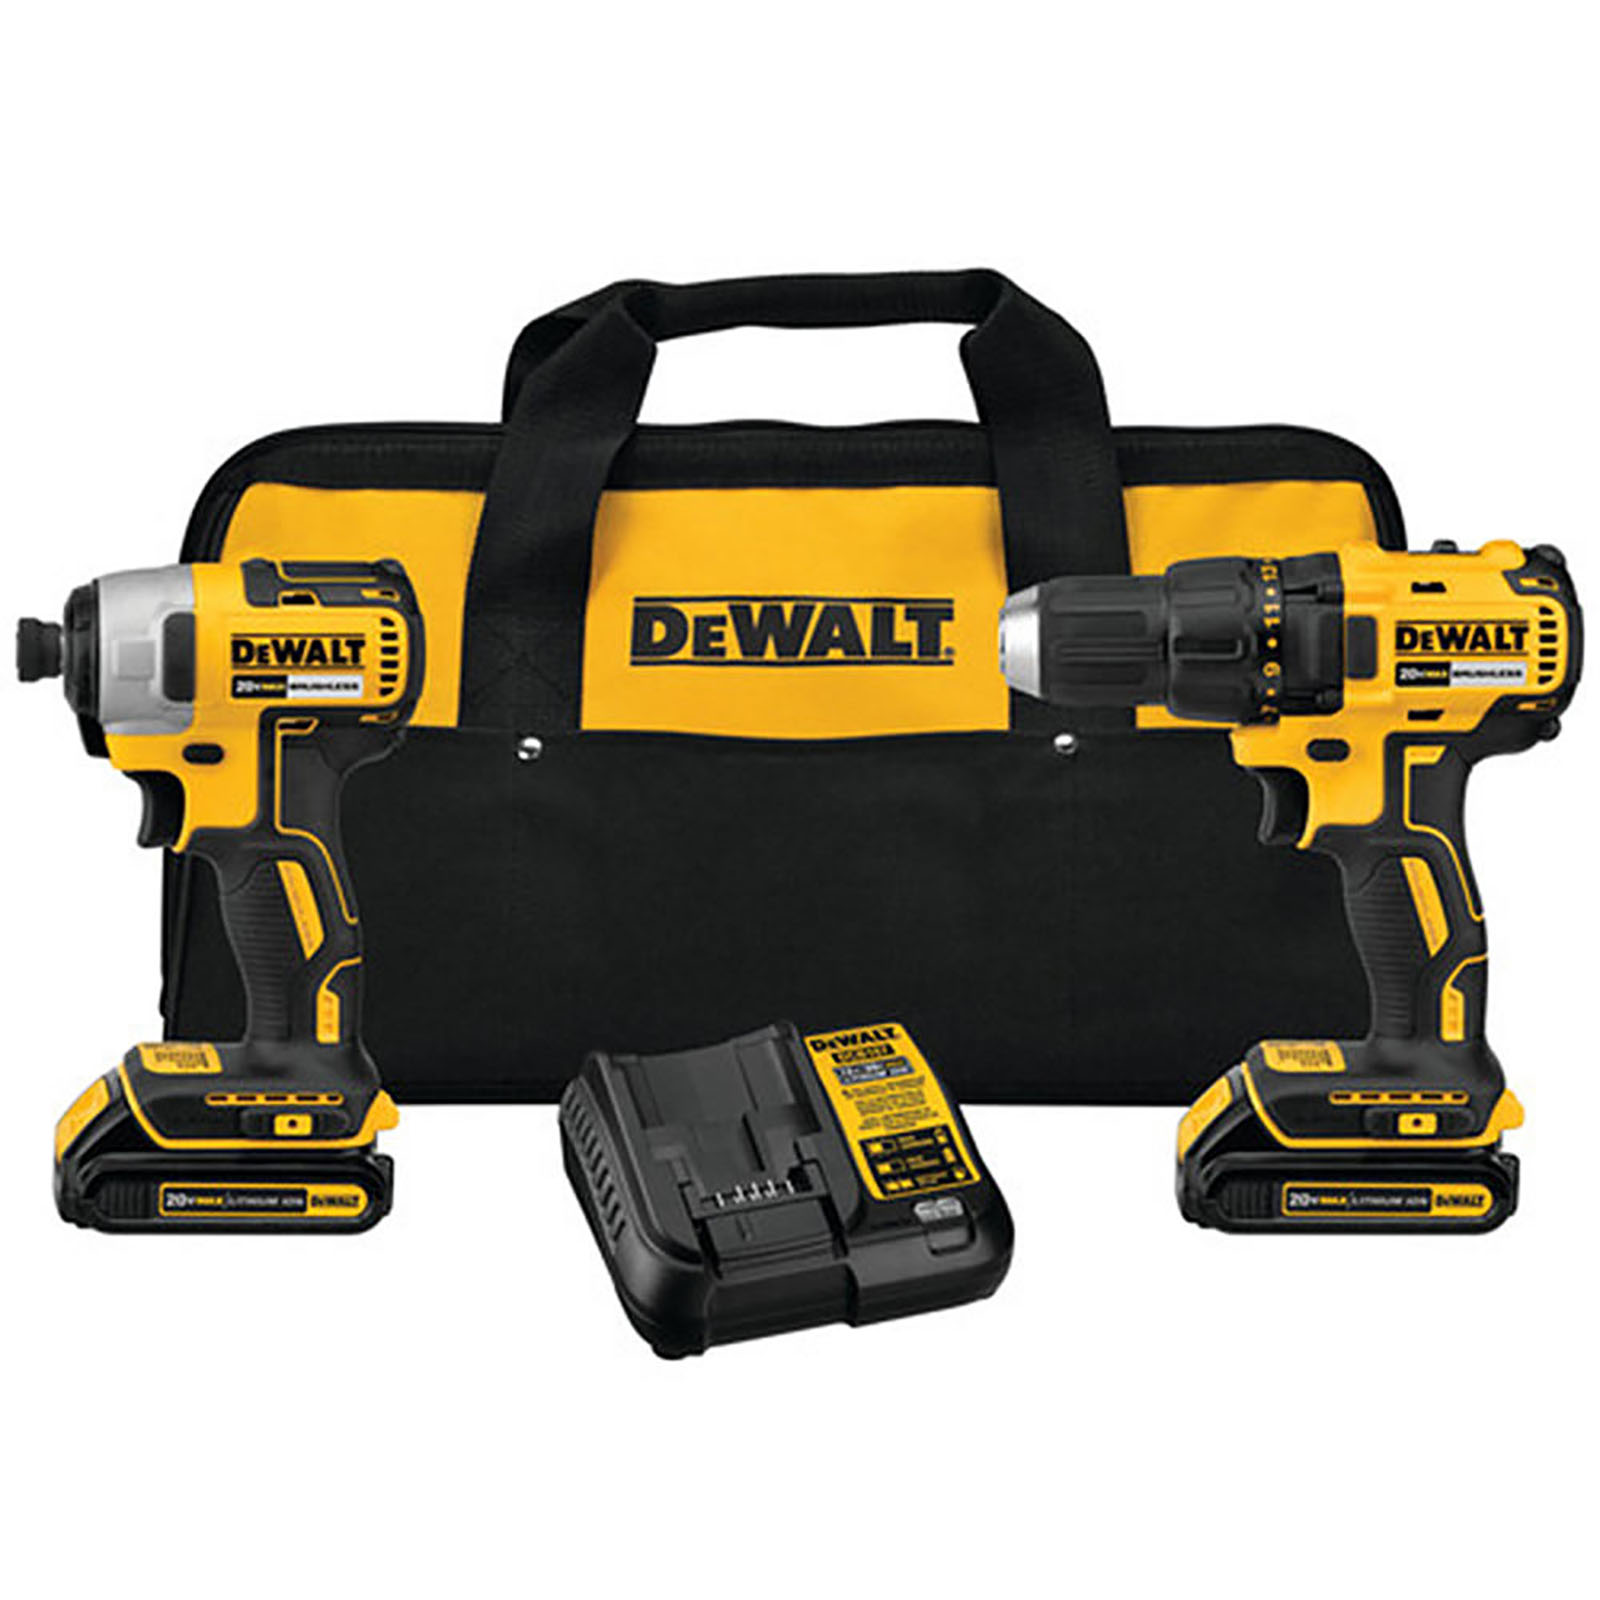 DeWalt DCK277C2 20V MAX Cordless Brushless Compact Drill and Driver Kit with Accessories